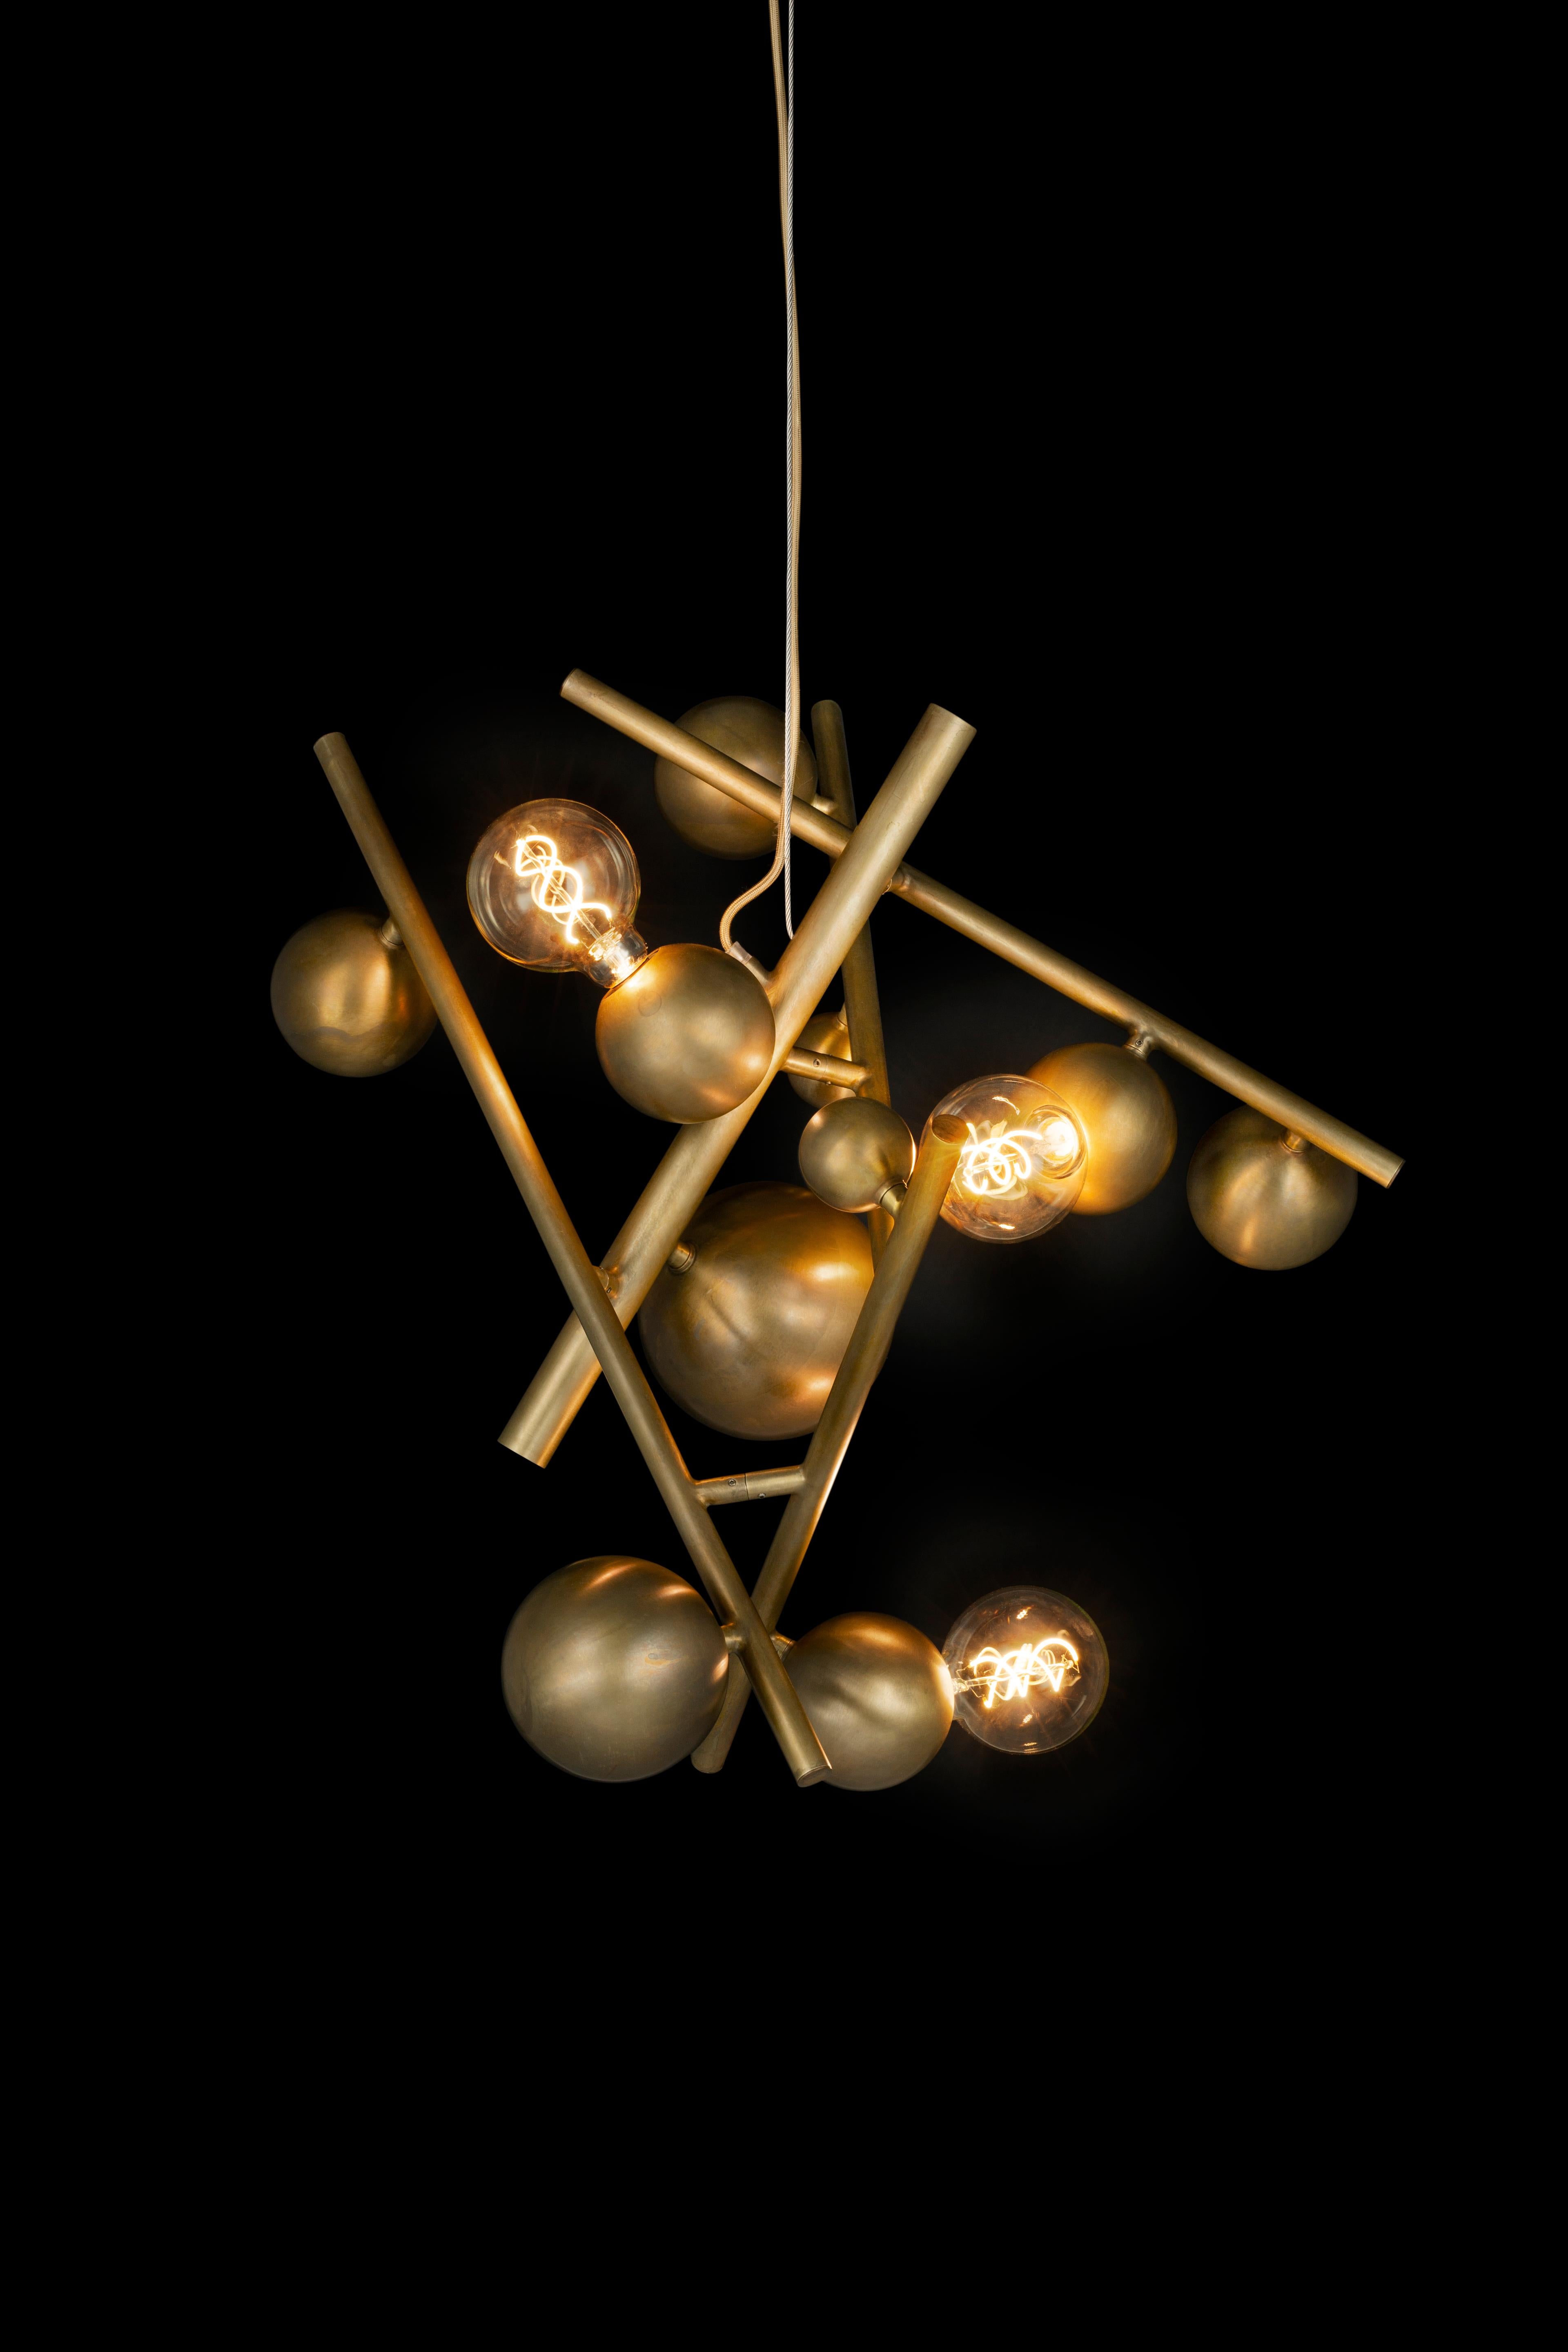 The Galaxy, a modern chandelier in a brass burnished finish, is designed by William Brand, founder of Brand van Egmond. Sculptural and full of character, the chandelier is available in two sizes, with and without downlights, in the finishes black